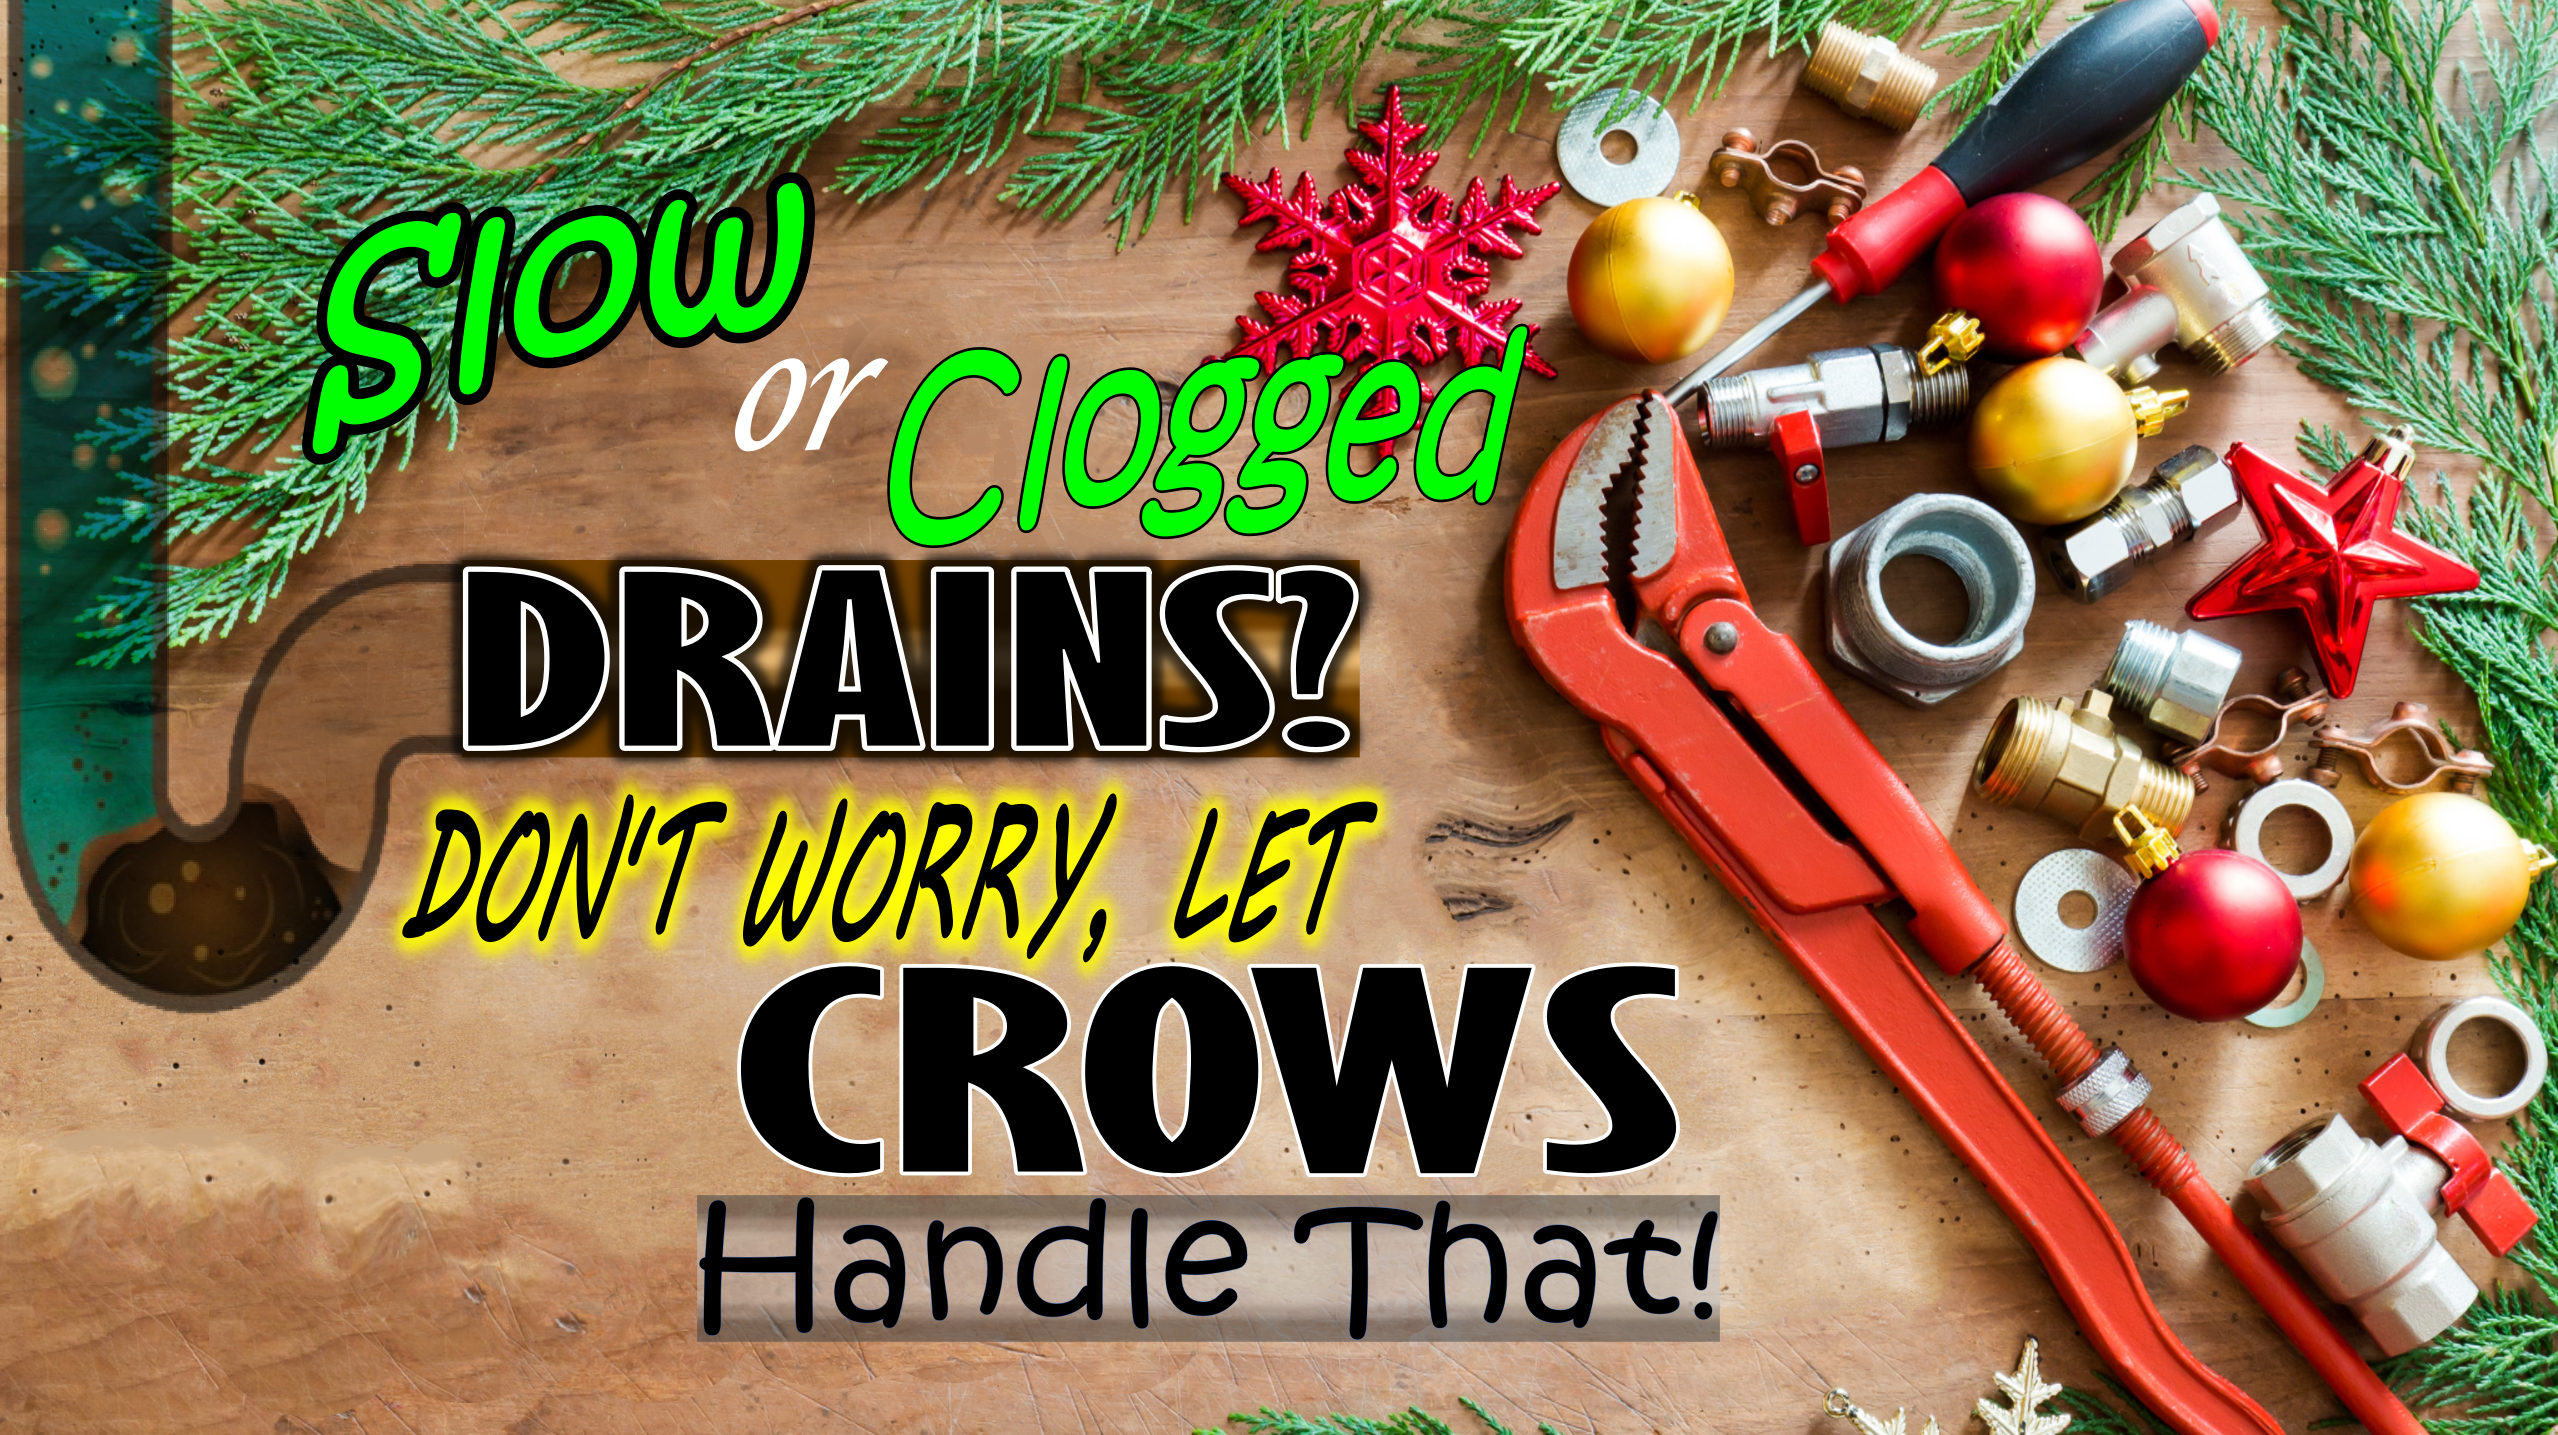 Slow or clogged drains ad